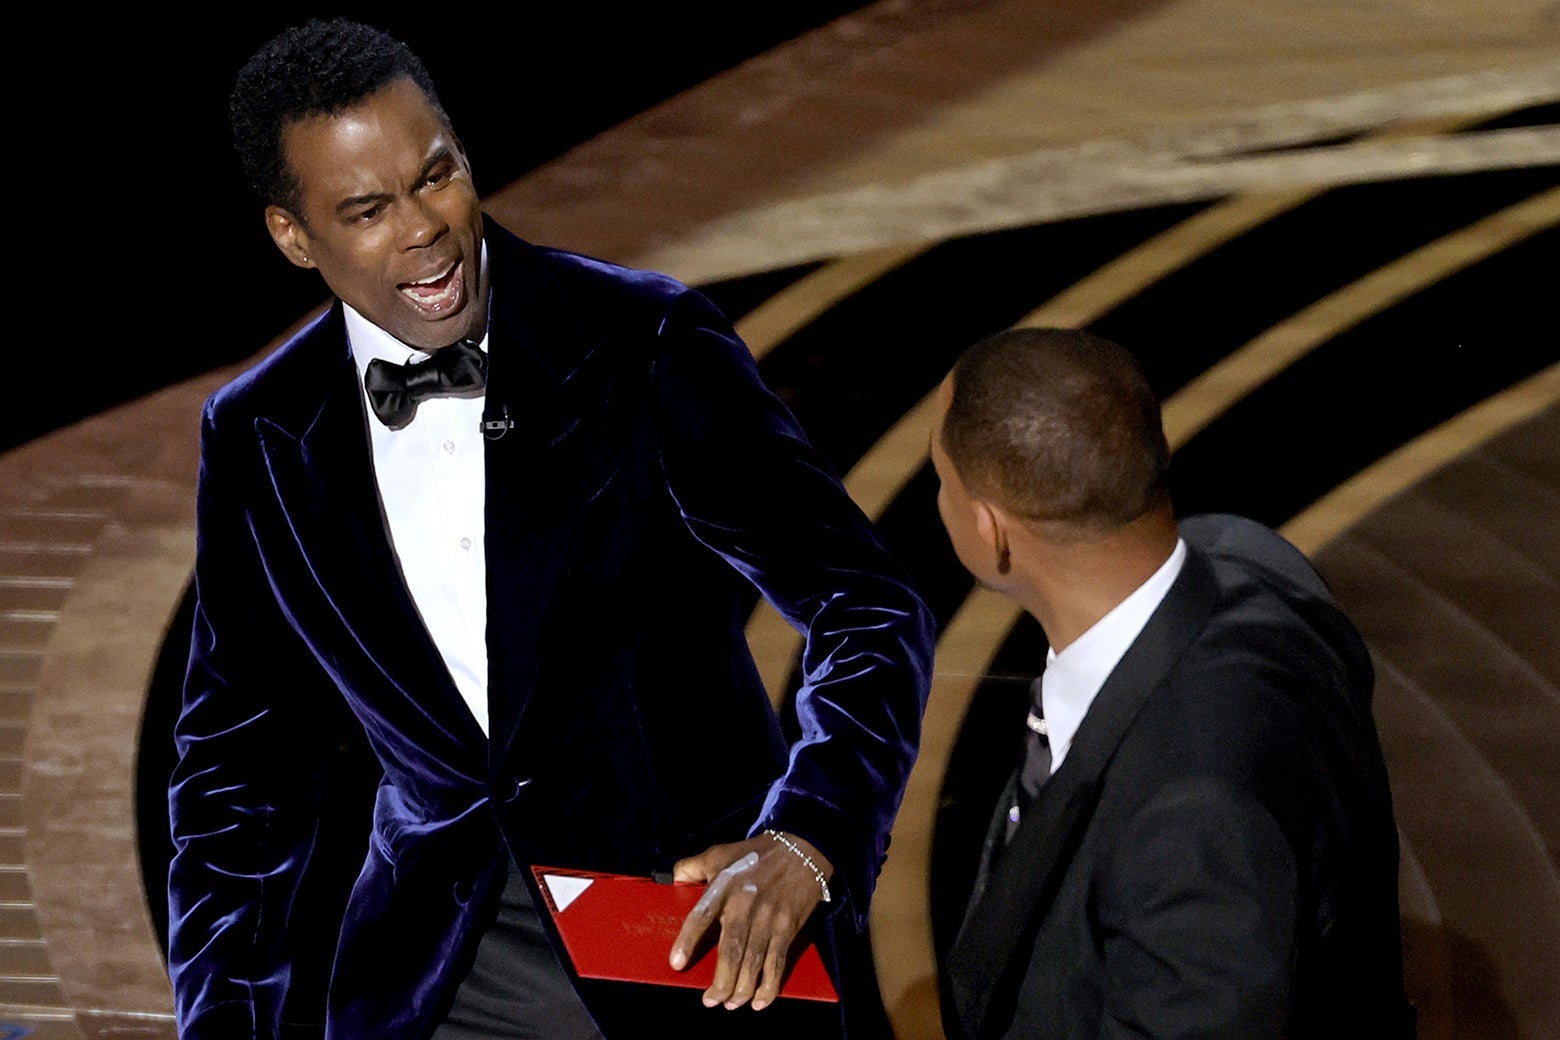 Chris Rock open-mouthed and reeling back in shock as Will Smith stands in front of him on the Oscars stage